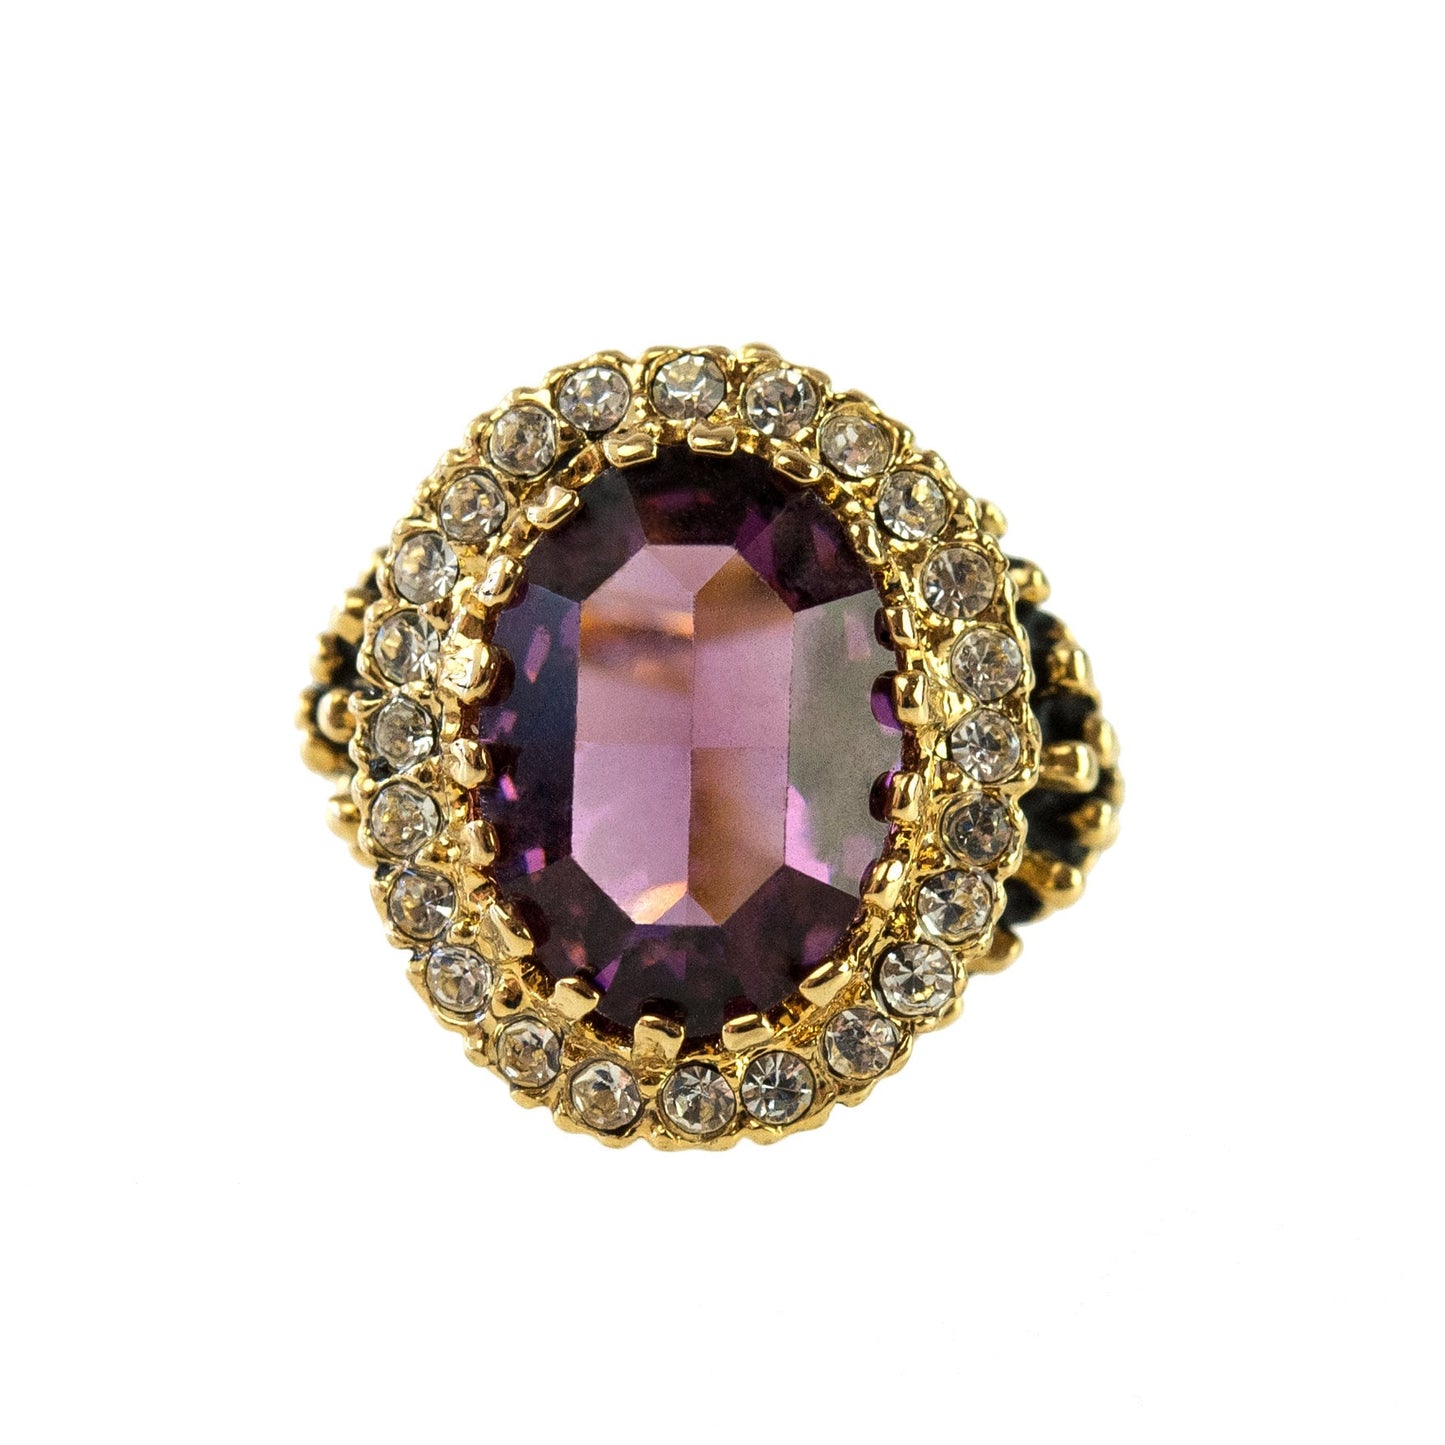 Vintage Ring Amethyst and Clear Crystal 18k Antique Gold Ring Made in the USA #R169 - Limited Stock - Never Worn